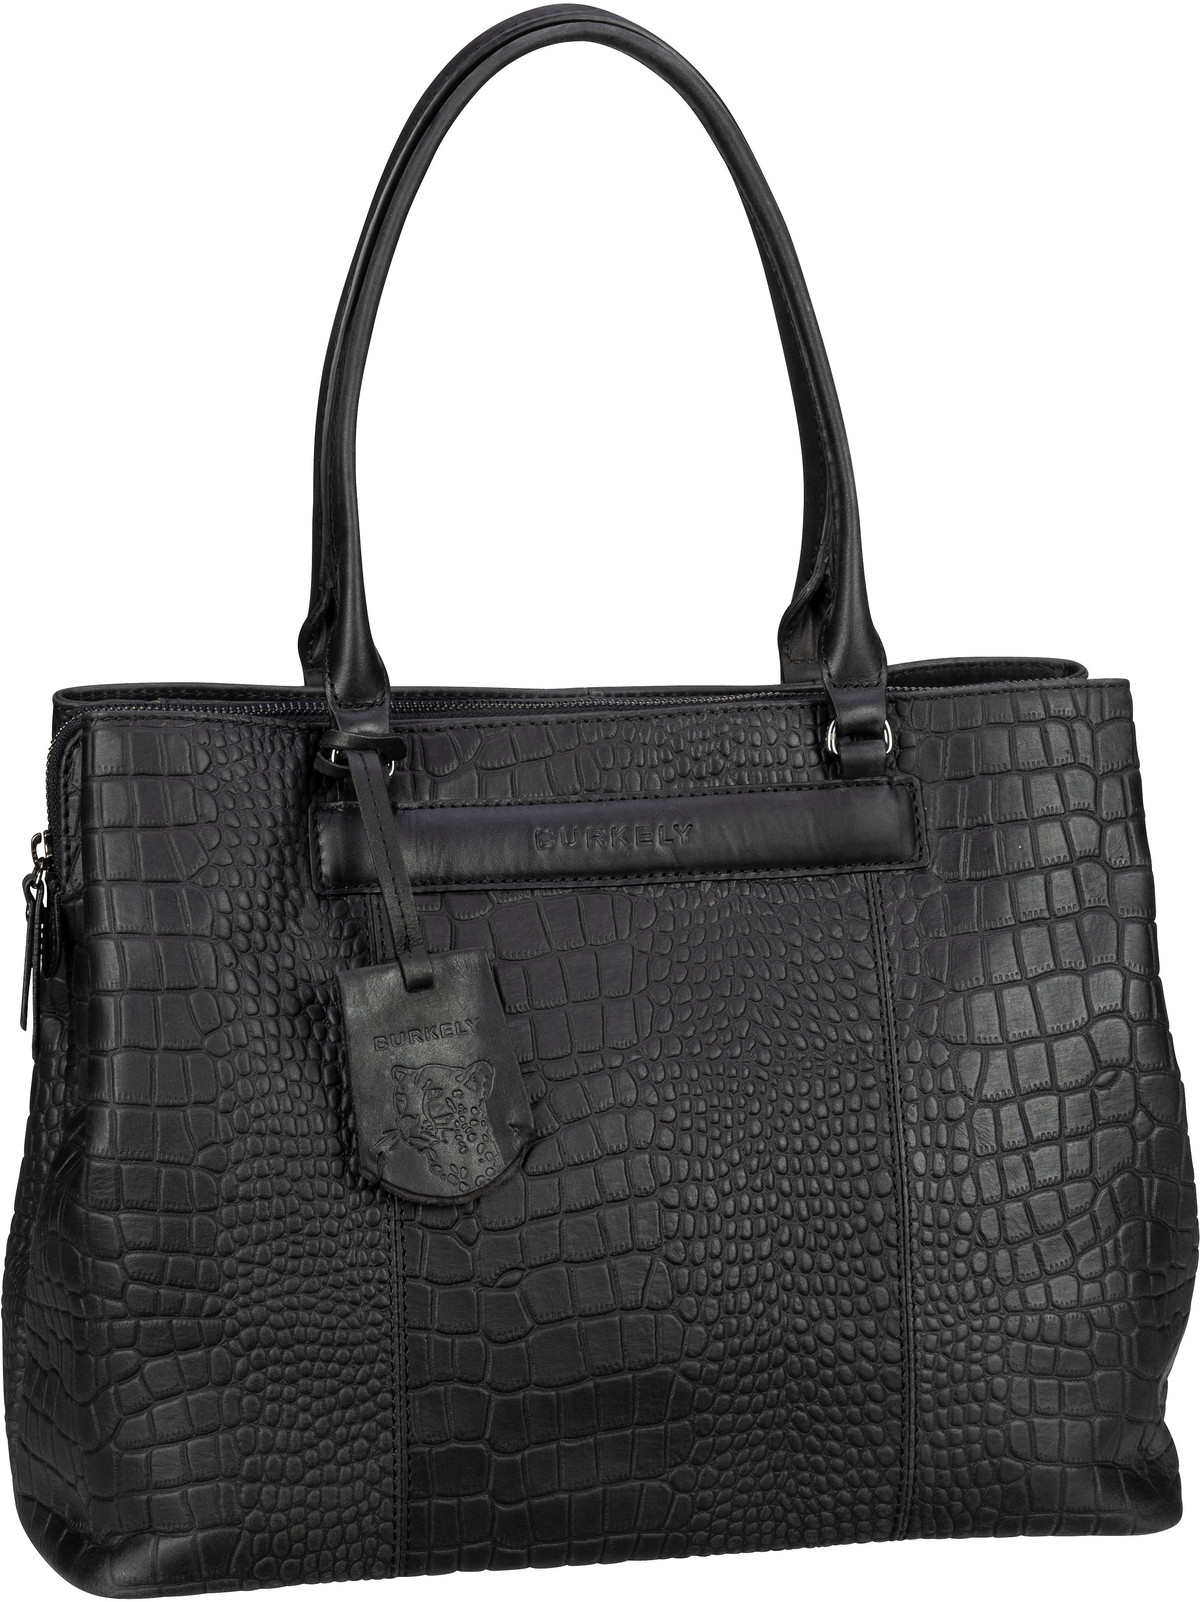 Burkely Casual Carly Shopper 13'' - Black